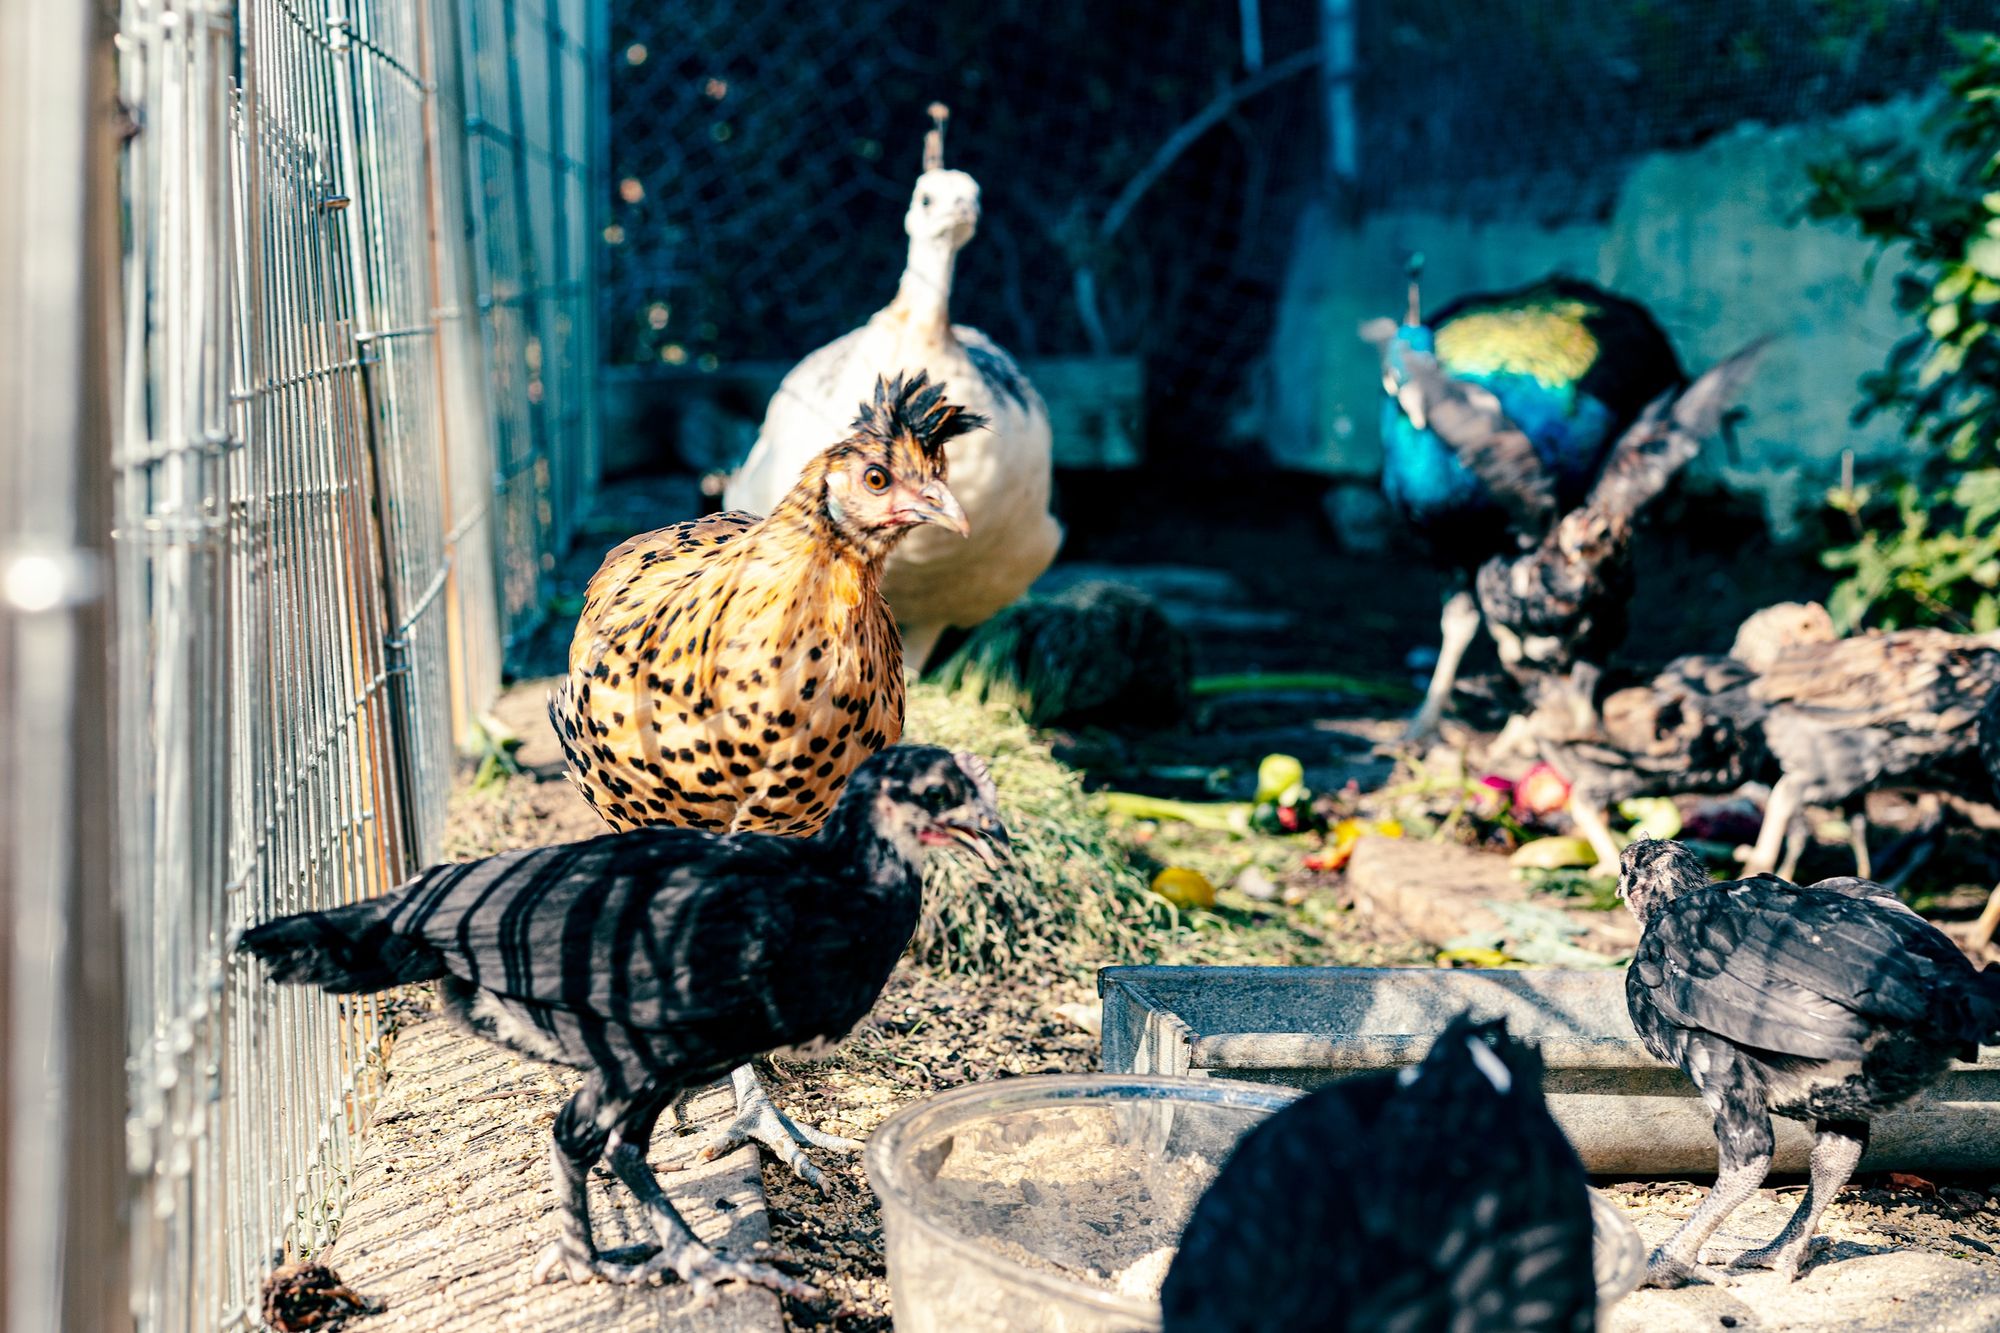 chickens in enclosure Maximizing Your Space: The Benefits of Raising Your Own Food in Small Areas